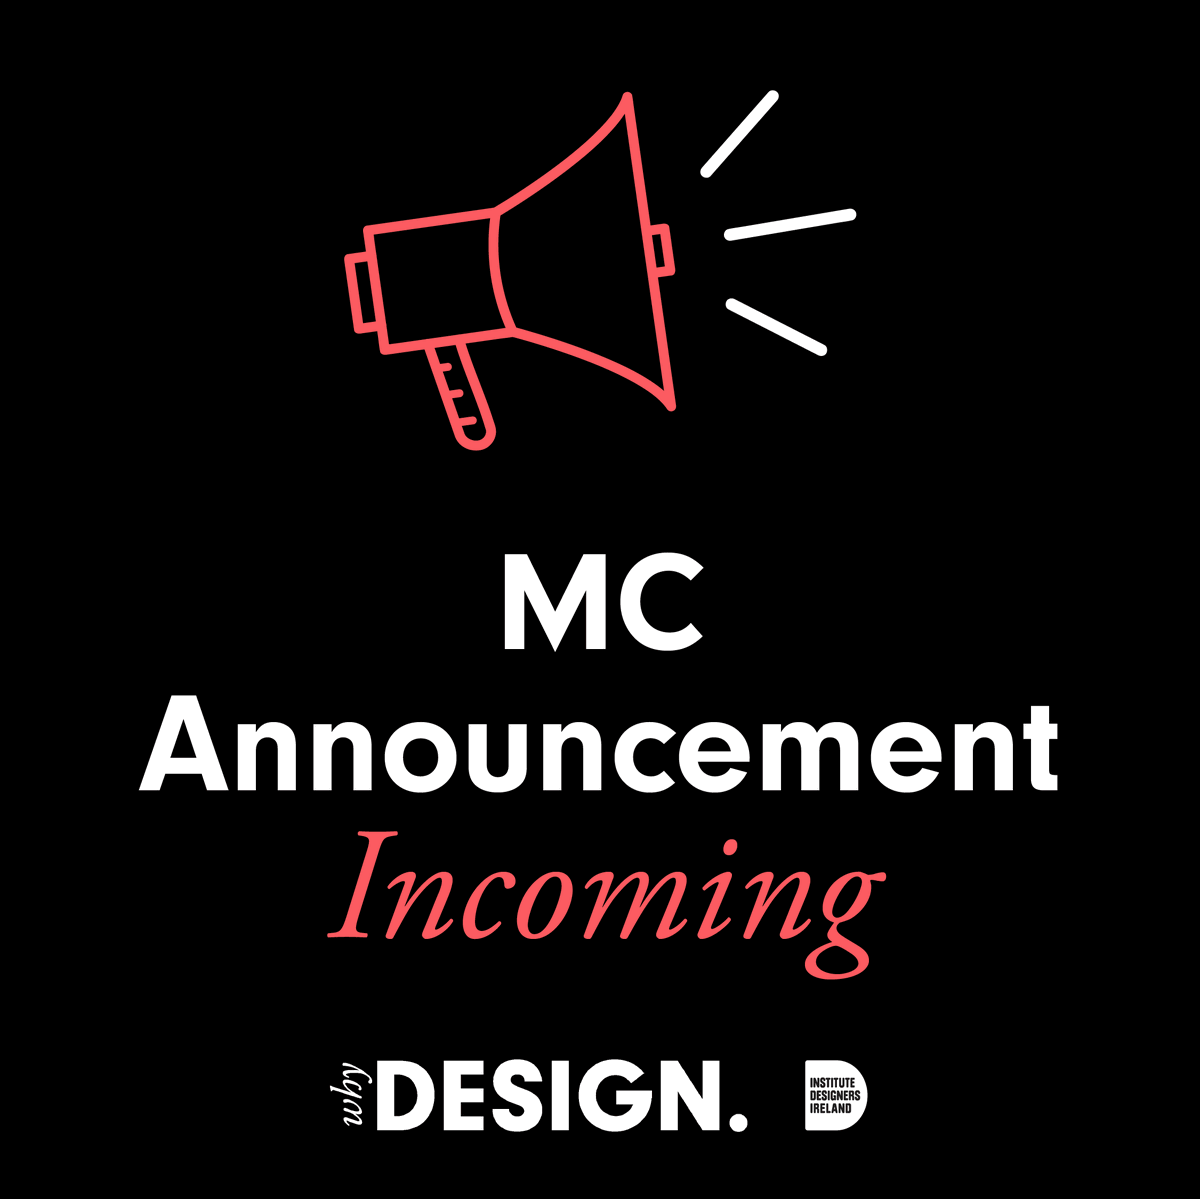 COMING SOON!!⁠

Tickets are now live through the link below!! 🎟️
⁠bit.ly/EbWD23

We're putting the finishing touches on our speaker announcements, but we're excited to reveal them very soon! ⁠
#EmbraceEquity #creatives #designinireland #WhyDesign2023 #Leadingdesign